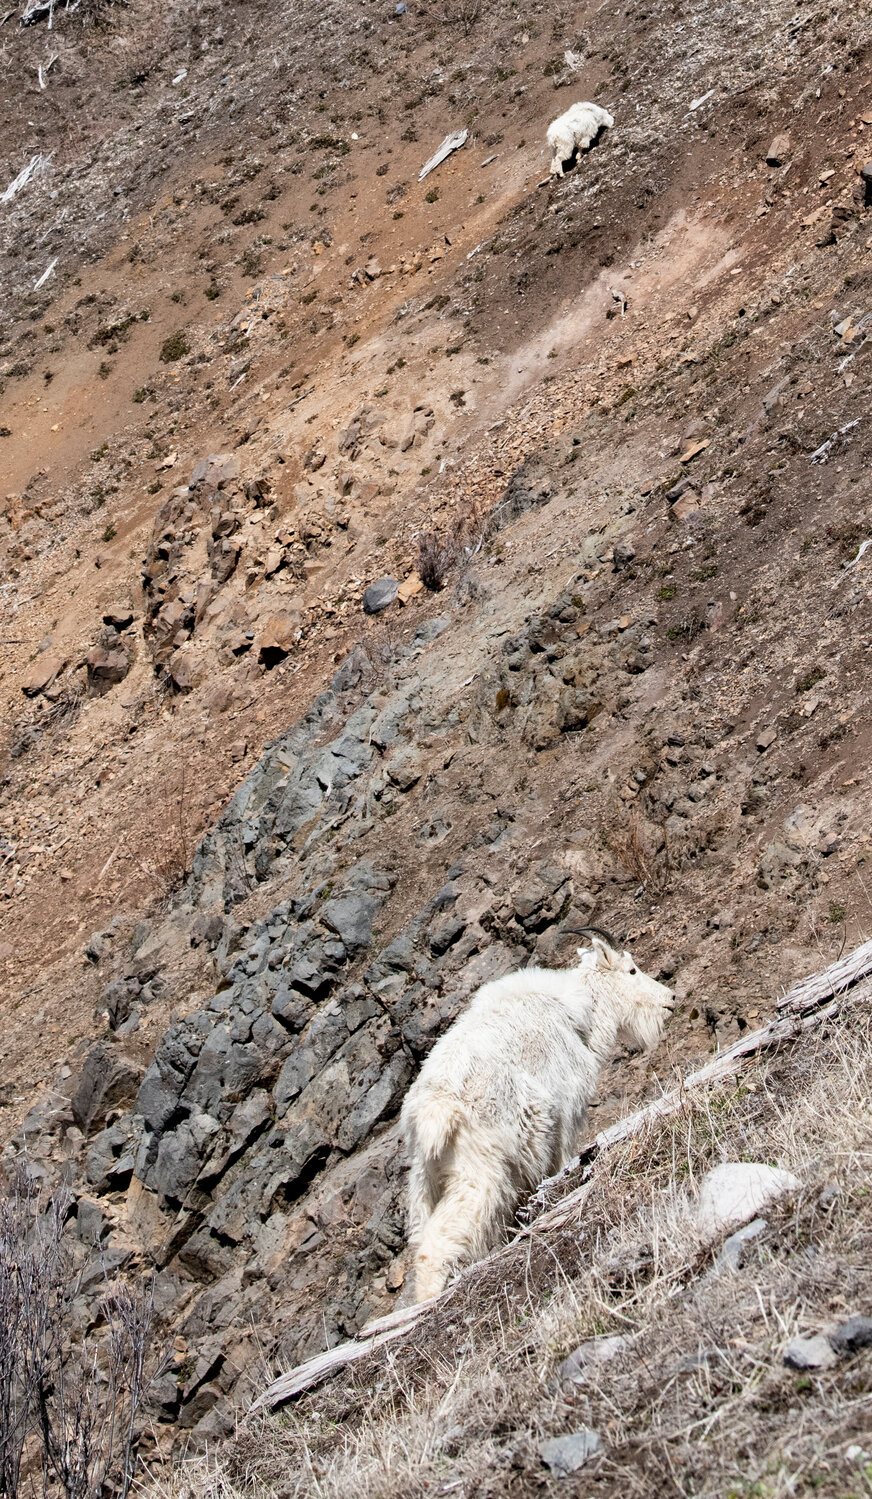 Two mountain goats are pictured grazing near Mount St. Helens by the Johnston Ridge Observatory on Thursday, May 11.